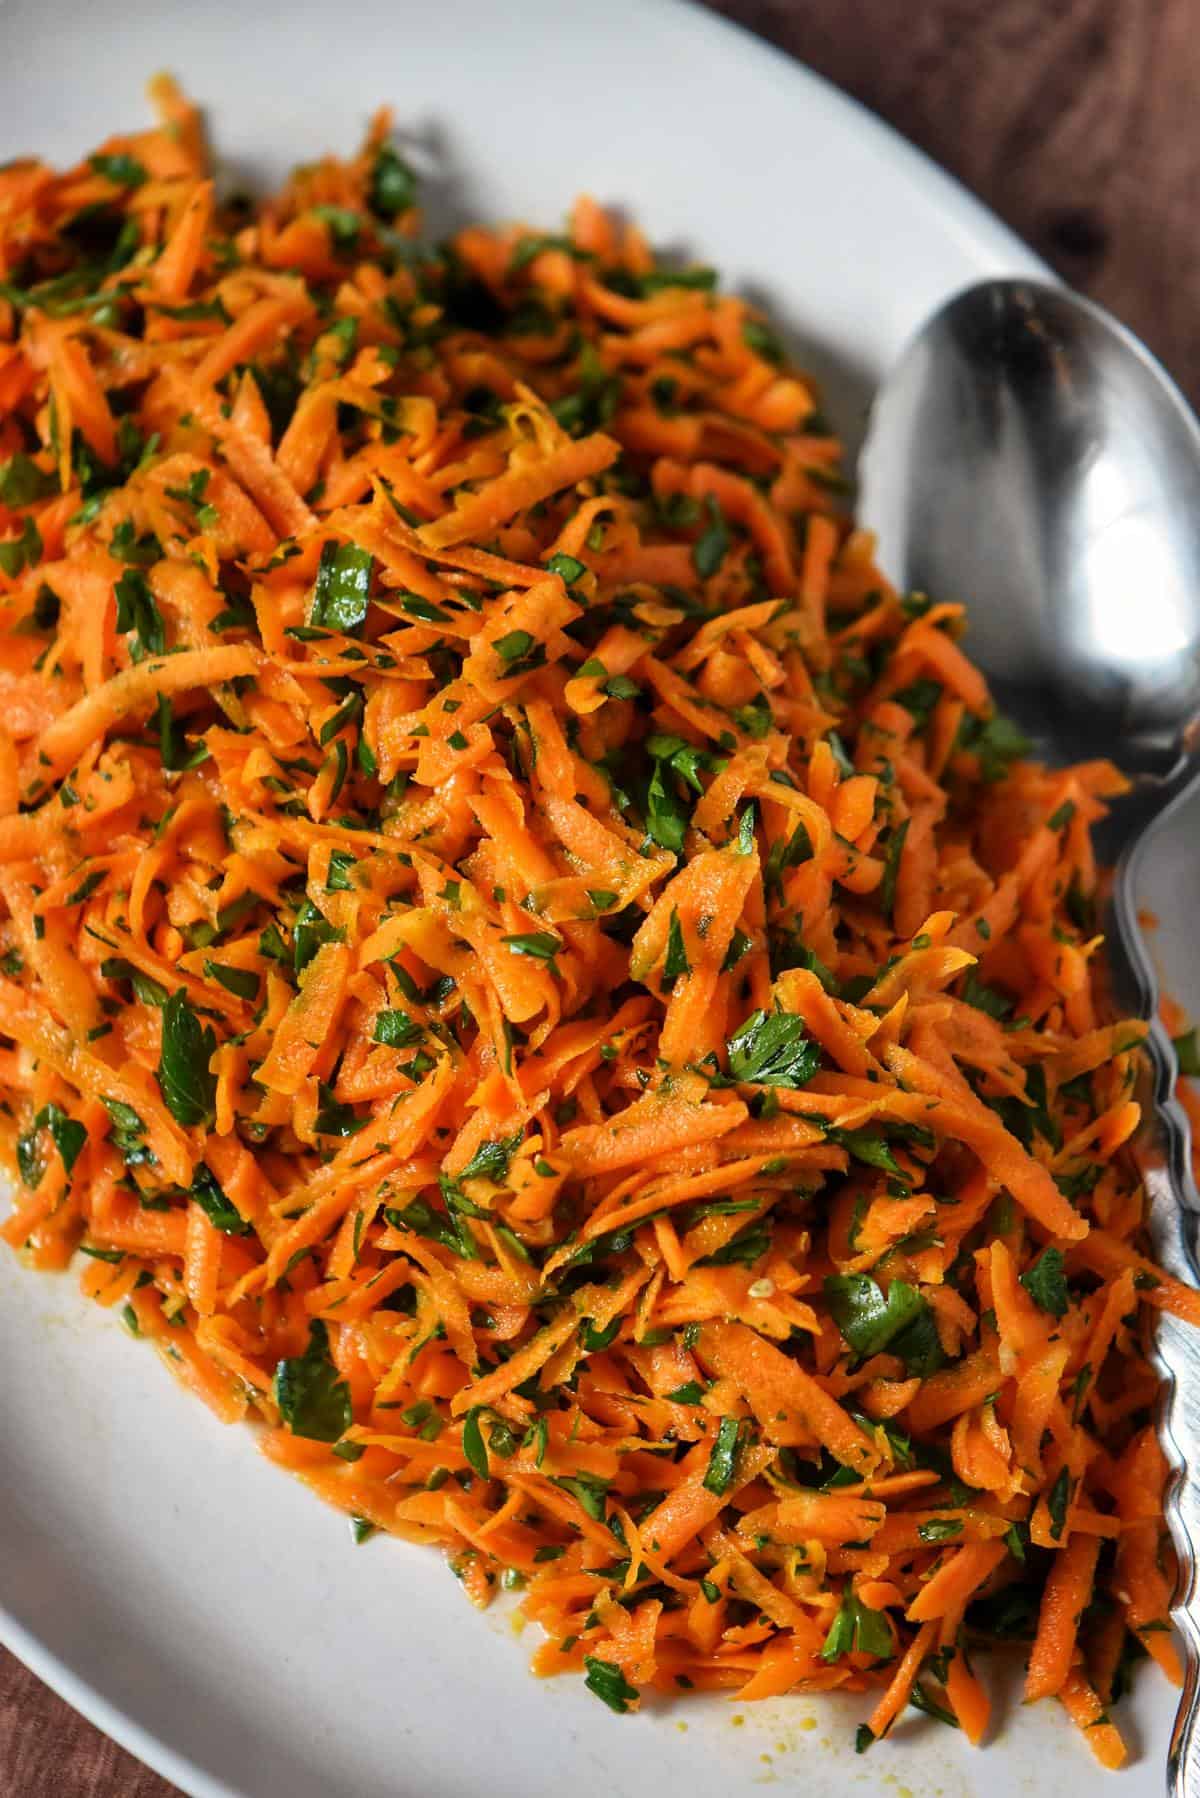 An overhead photo of carrot and parsley salad.